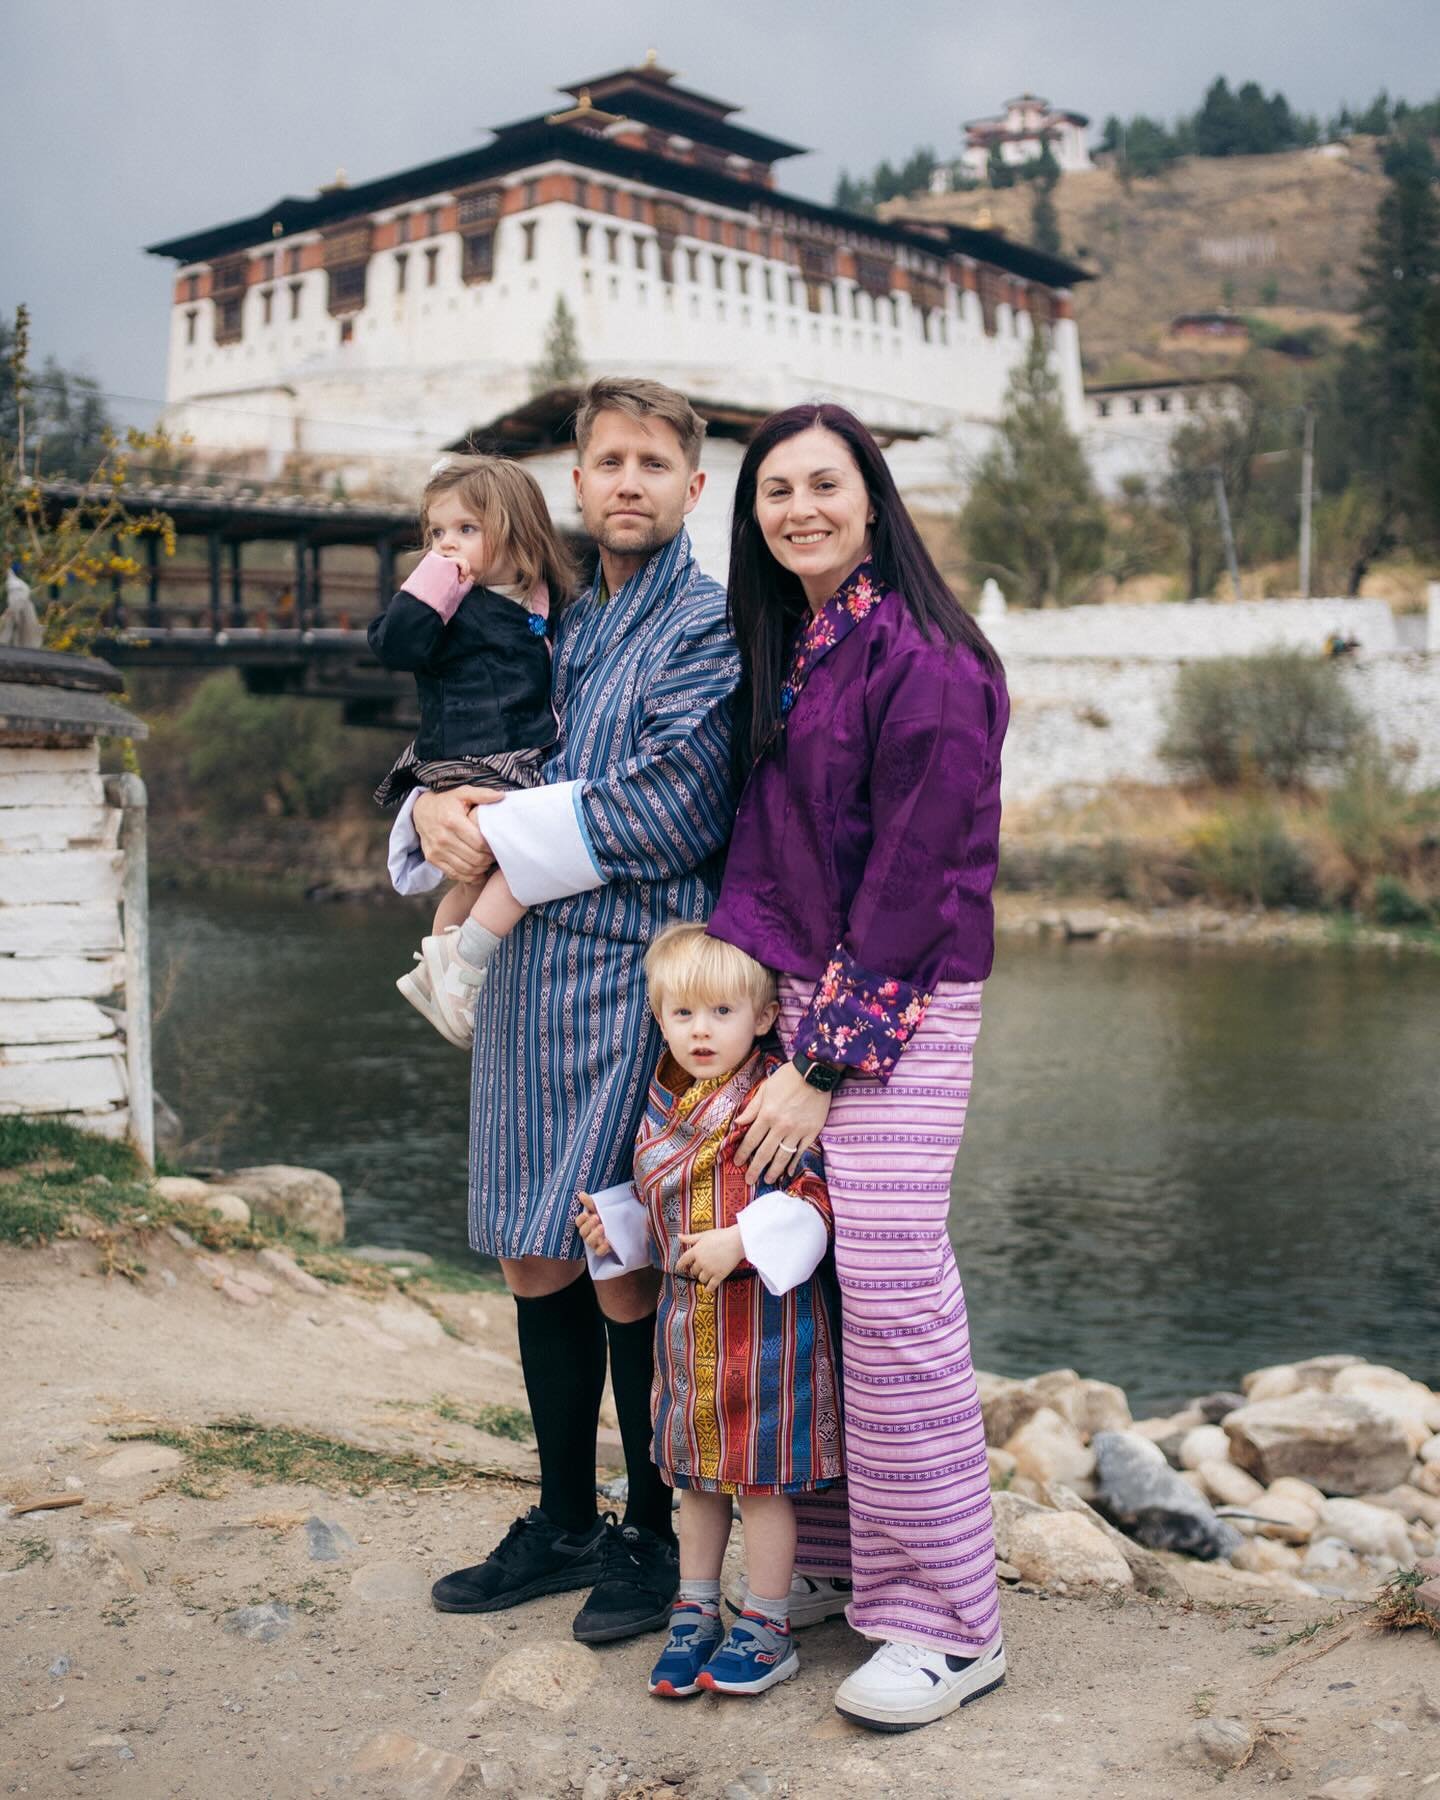 Our last big family trip in Asia before we move has come to an end, and what a trip it was. Incredibly thankful for these memories together ❤️ 

#bhutan #bhutan🇧🇹 #sonyalpha #travelfamily #travelfam #militarylife #asiatravel #travelingtoddler #fami